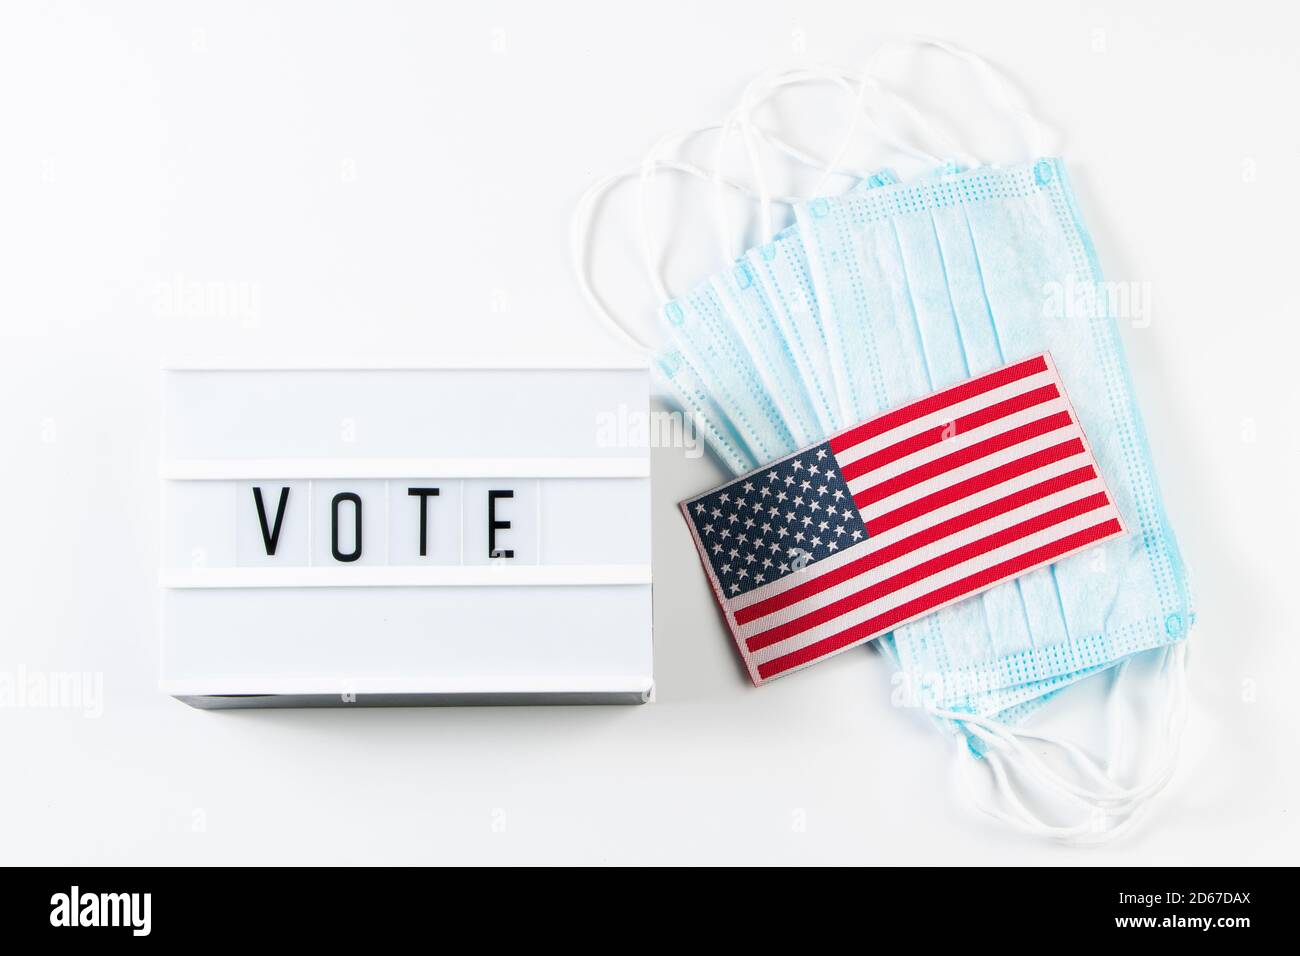 Vote now. Voting concept for the November 3 elections. Medical protective masks and USA flag on white background. Stock Photo